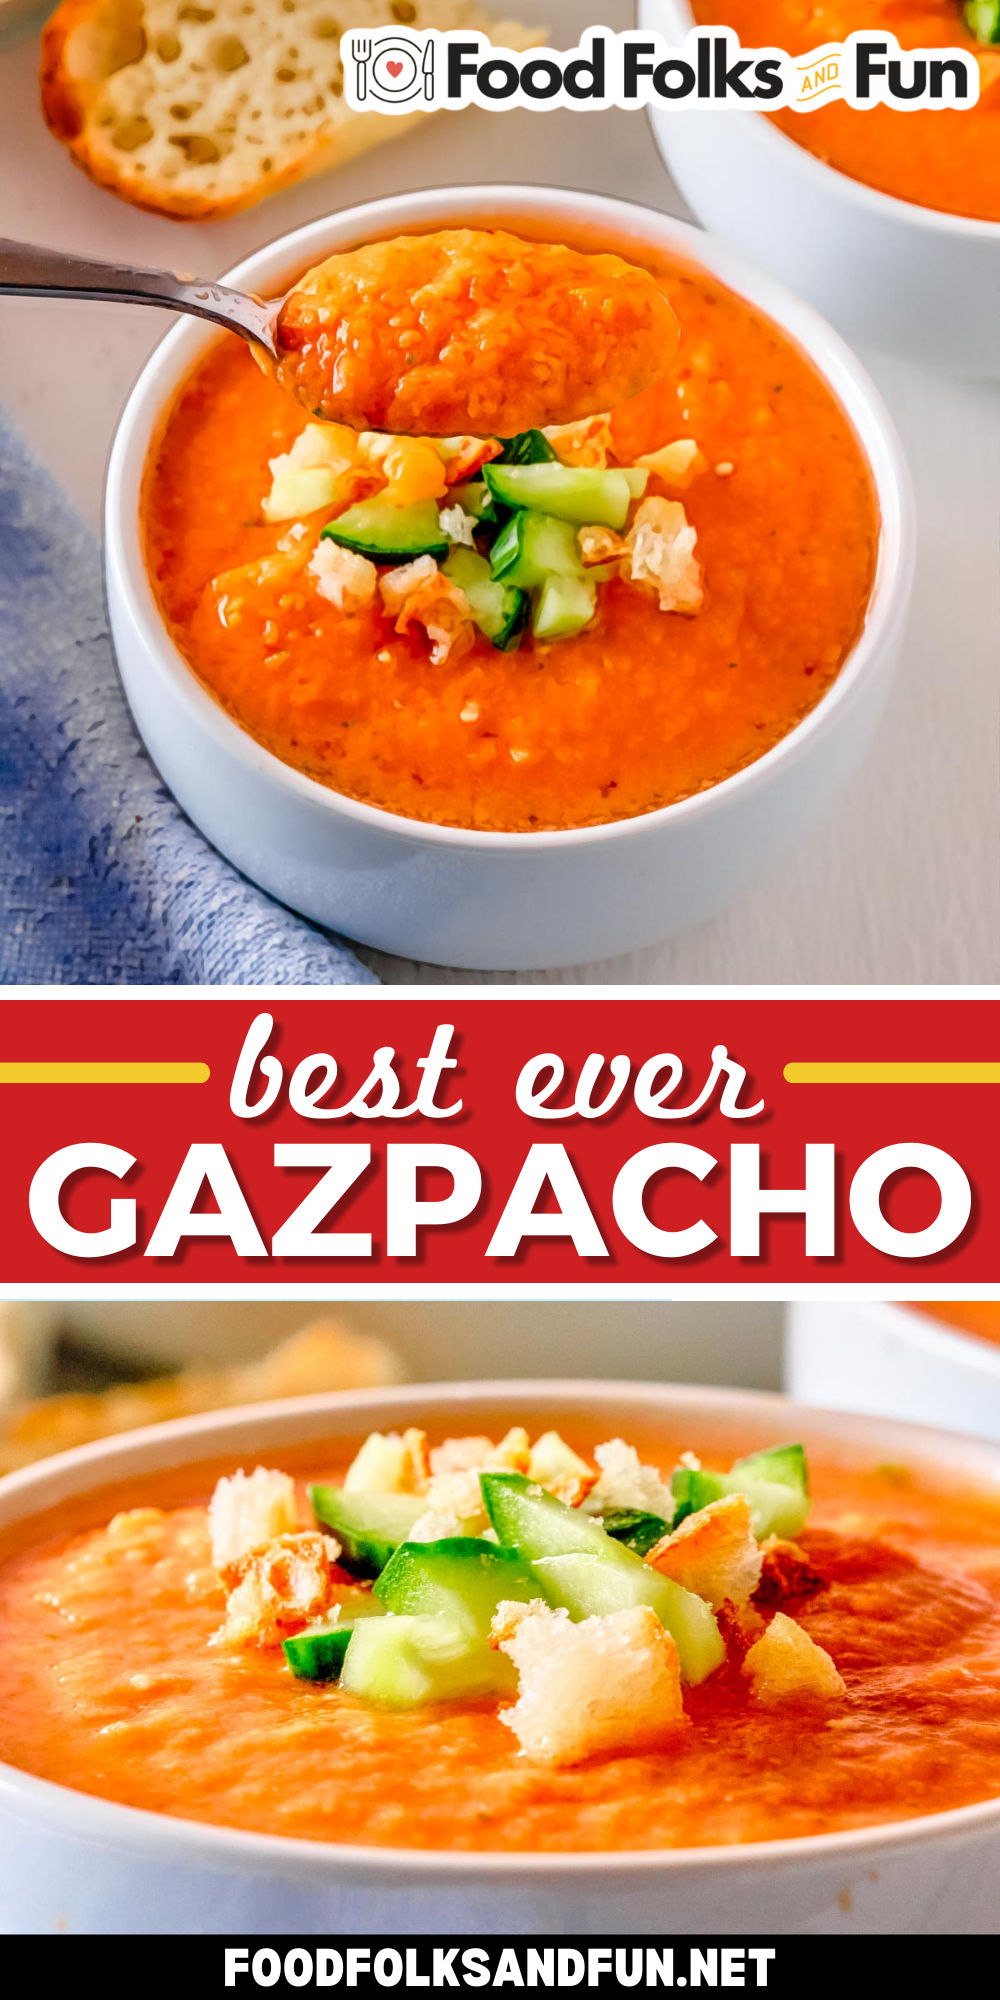 This Gazpacho Soup is so fresh and rich with flavors of tomato while accompanied by cucumber, pepper, onion, and garlic. The spices of cumin and coriander top it off. via @foodfolksandfun